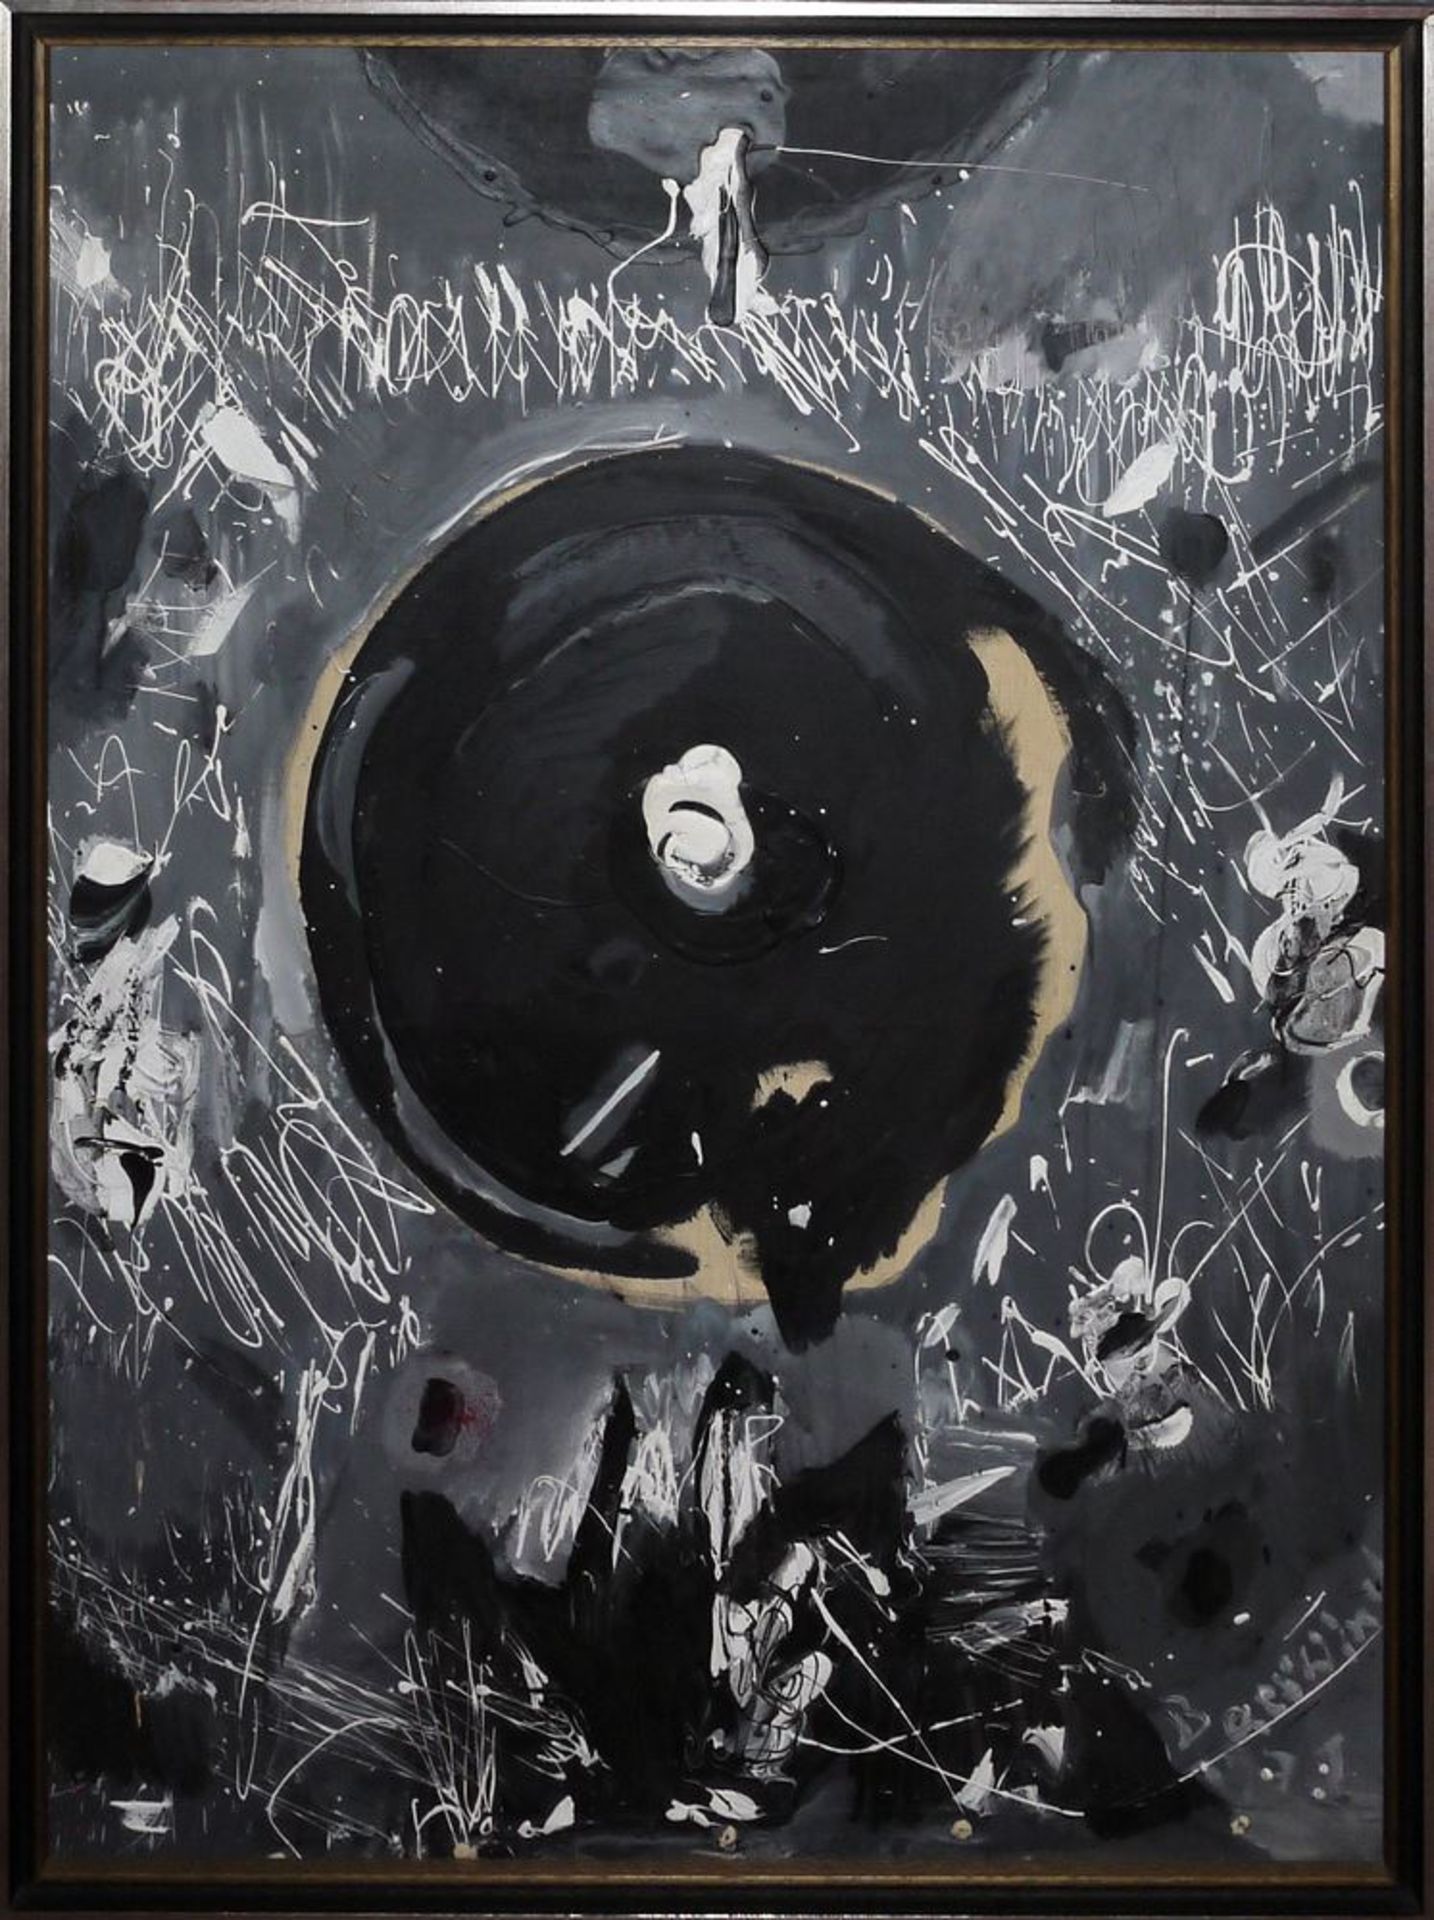 Rudi Baerwind, "Point noir dans l'espace", signed oil painting from 1971